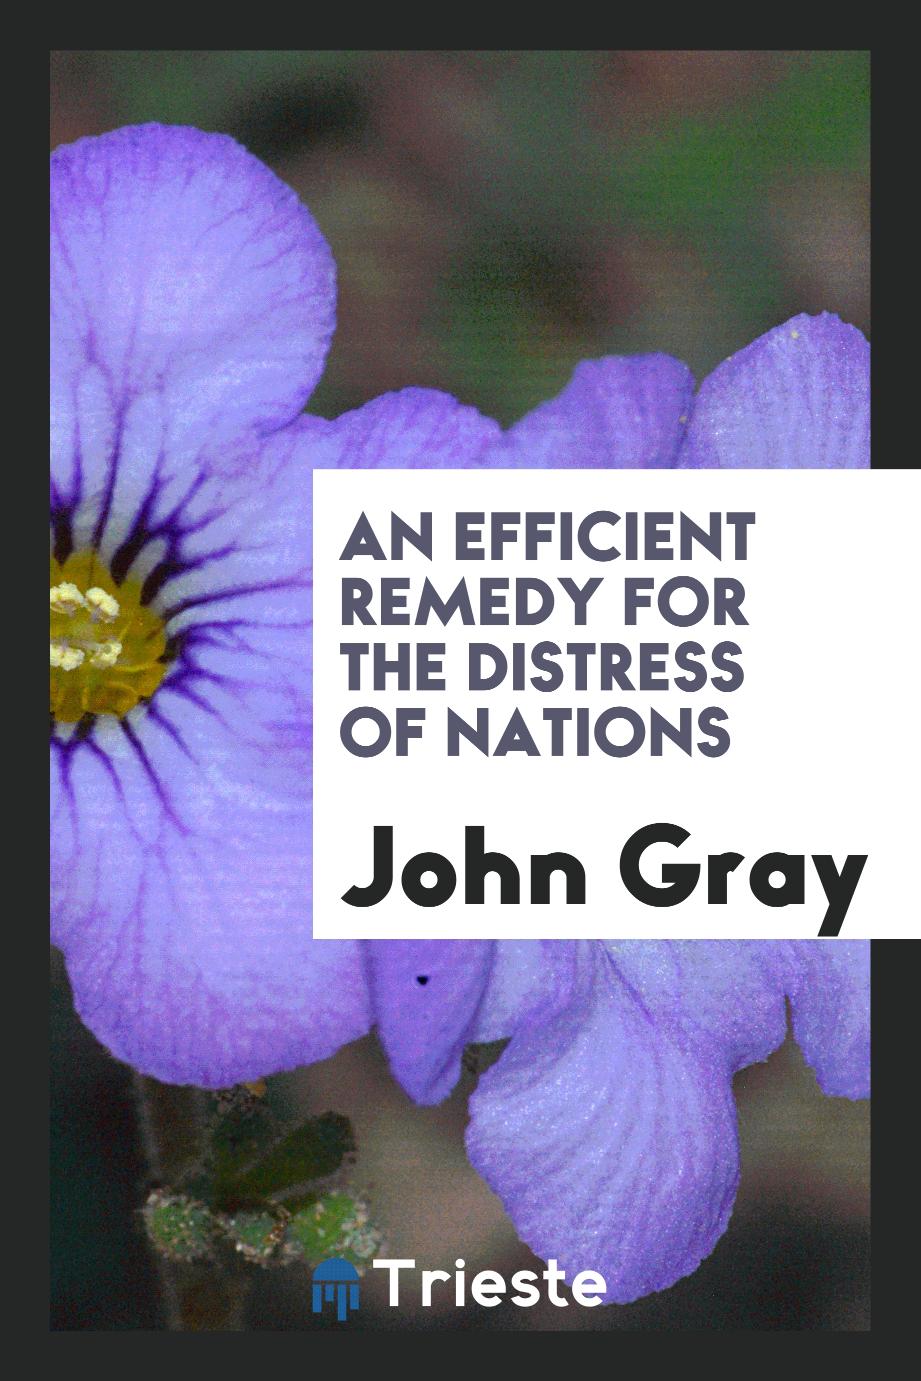 John Gray - An Efficient Remedy for the Distress of Nations